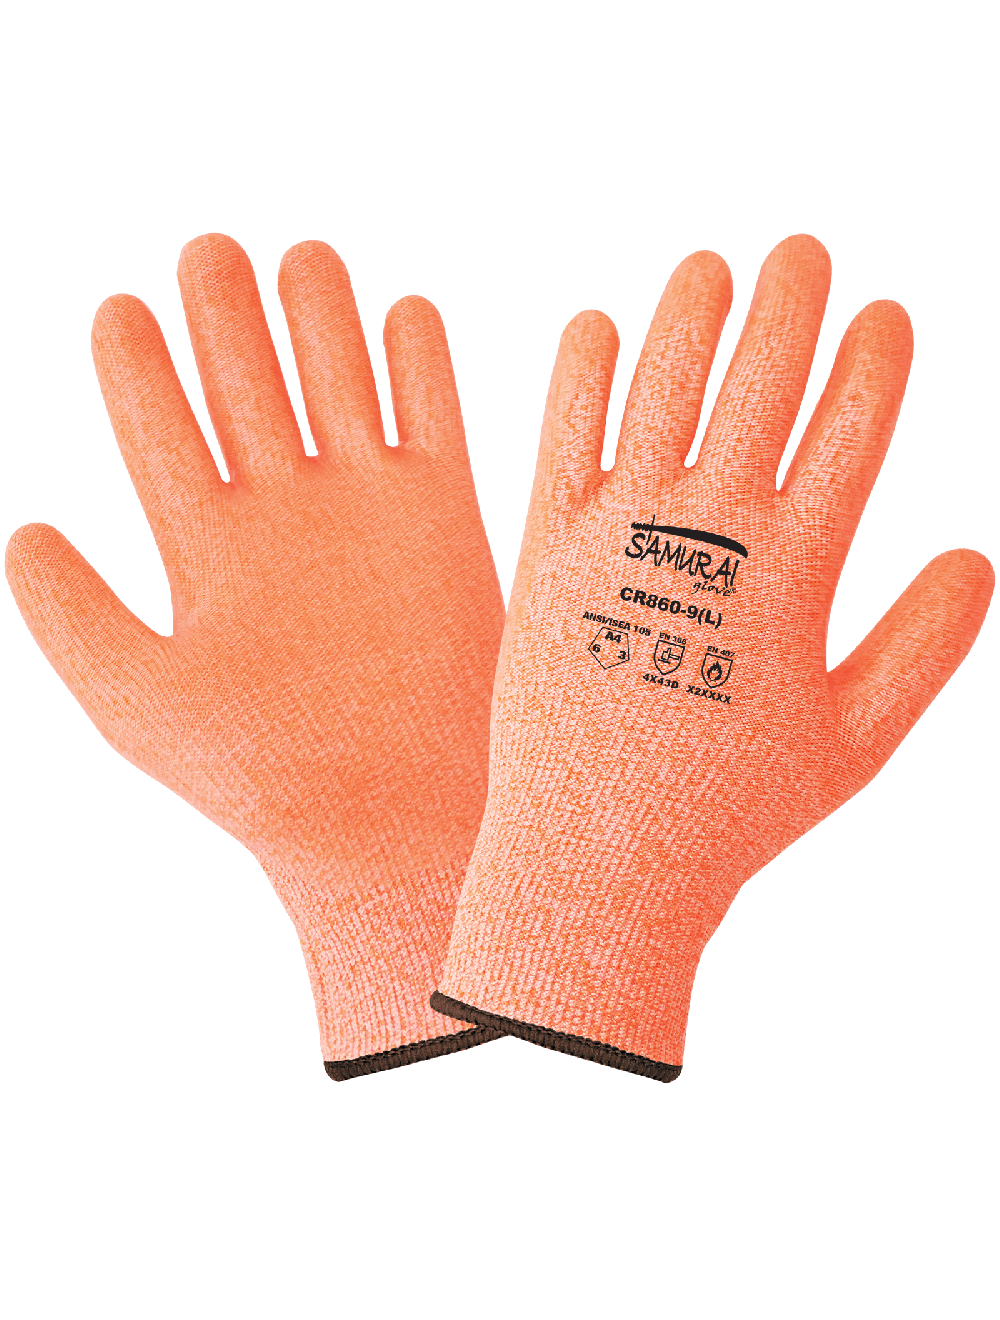 Samurai Glove® Supreme Grip Tack-Free Vulcanized Silicone-Coated Cut, Abrasion, and Puncture Resistant Gloves - CR860